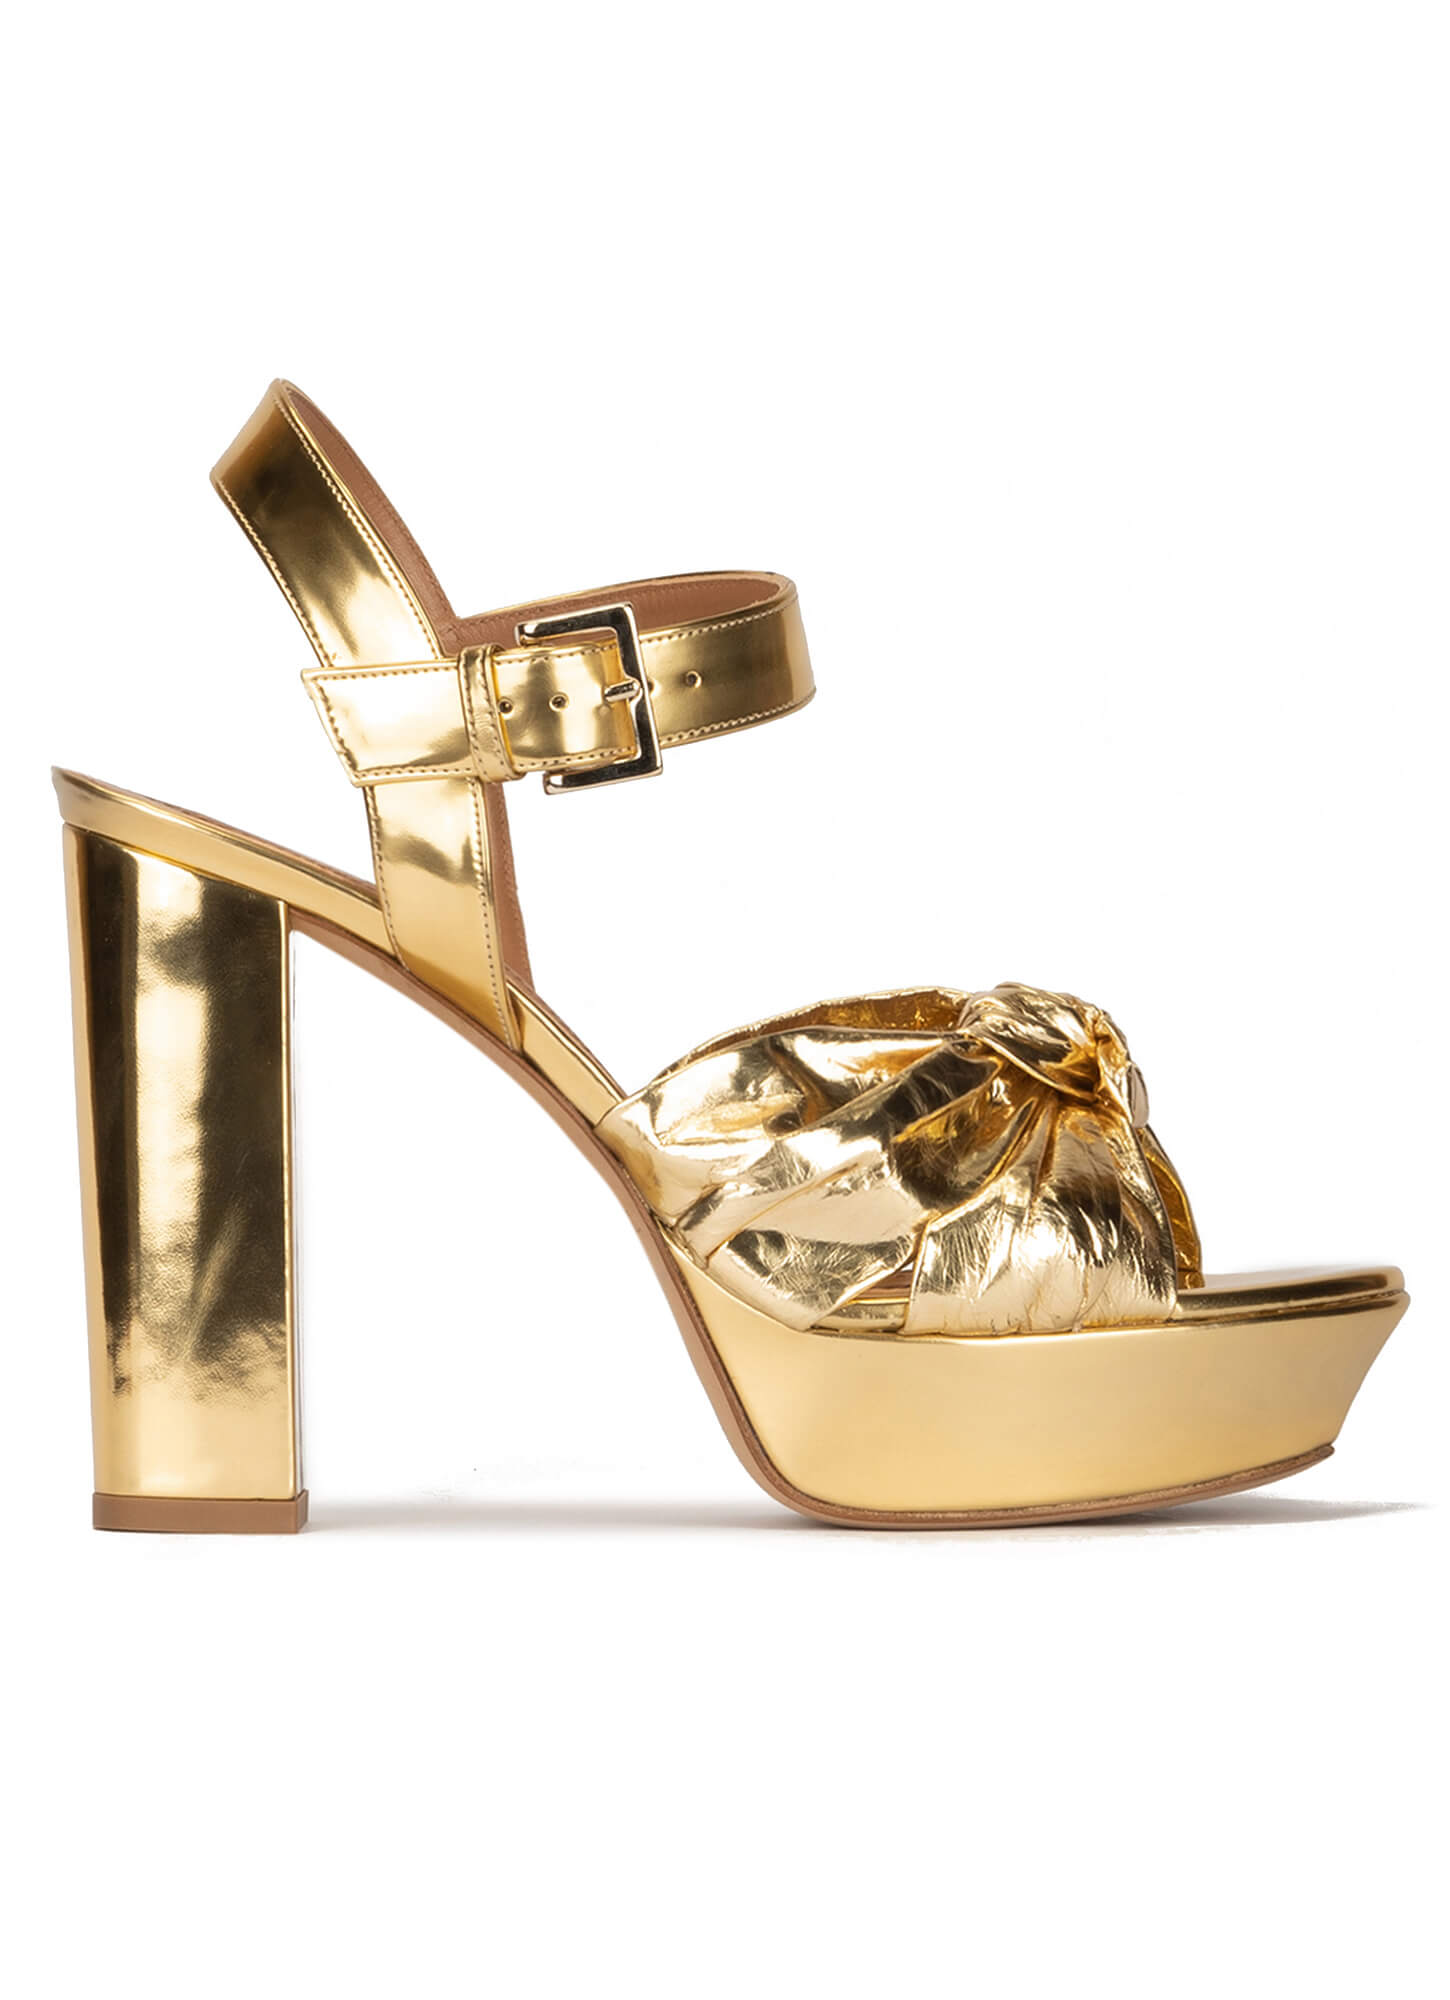 Chunky heel platform sandals in gold mirrored leather . PURA LOPEZ